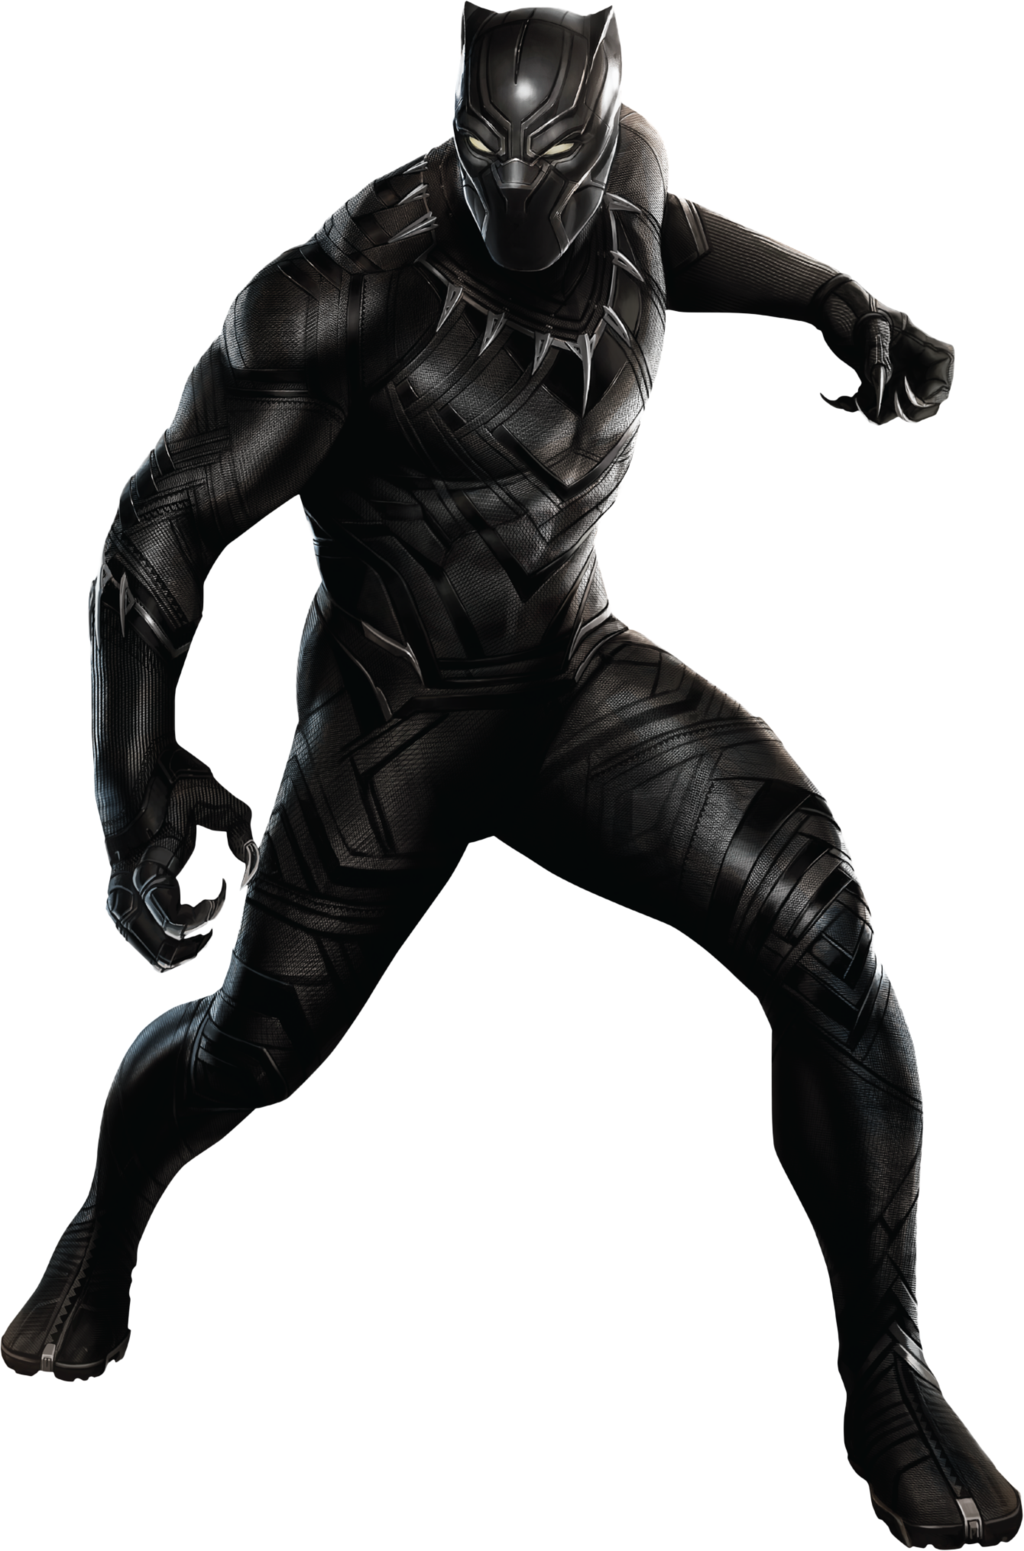 https://static.wikia.nocookie.net/vsbattles/images/b/b8/Captain_america_civil_war_black_panther_01_png_by_imangelpeabody-d9xd4gp.png/revision/latest?cb=20160708211641